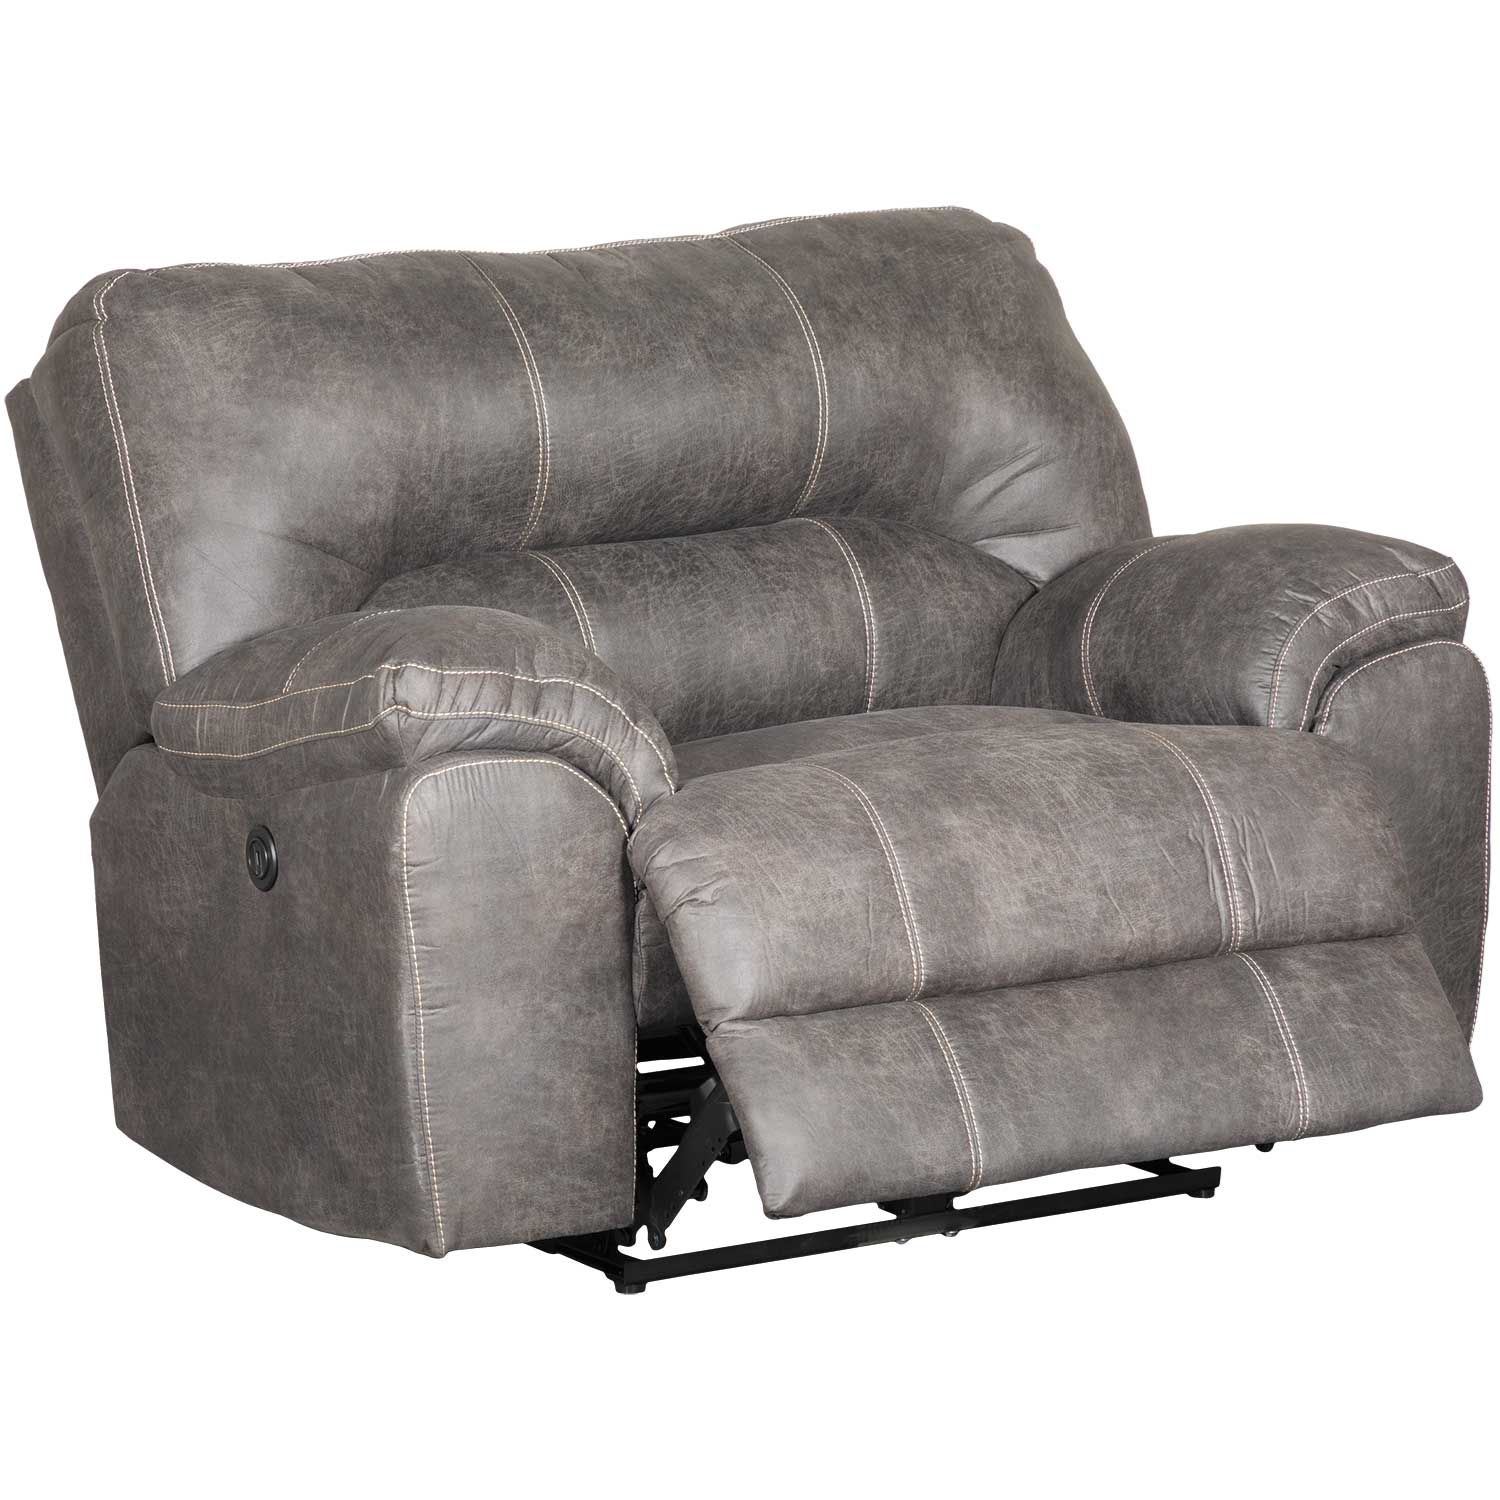 Relax in the Stallion Gray Cuddler Recliner AFW com